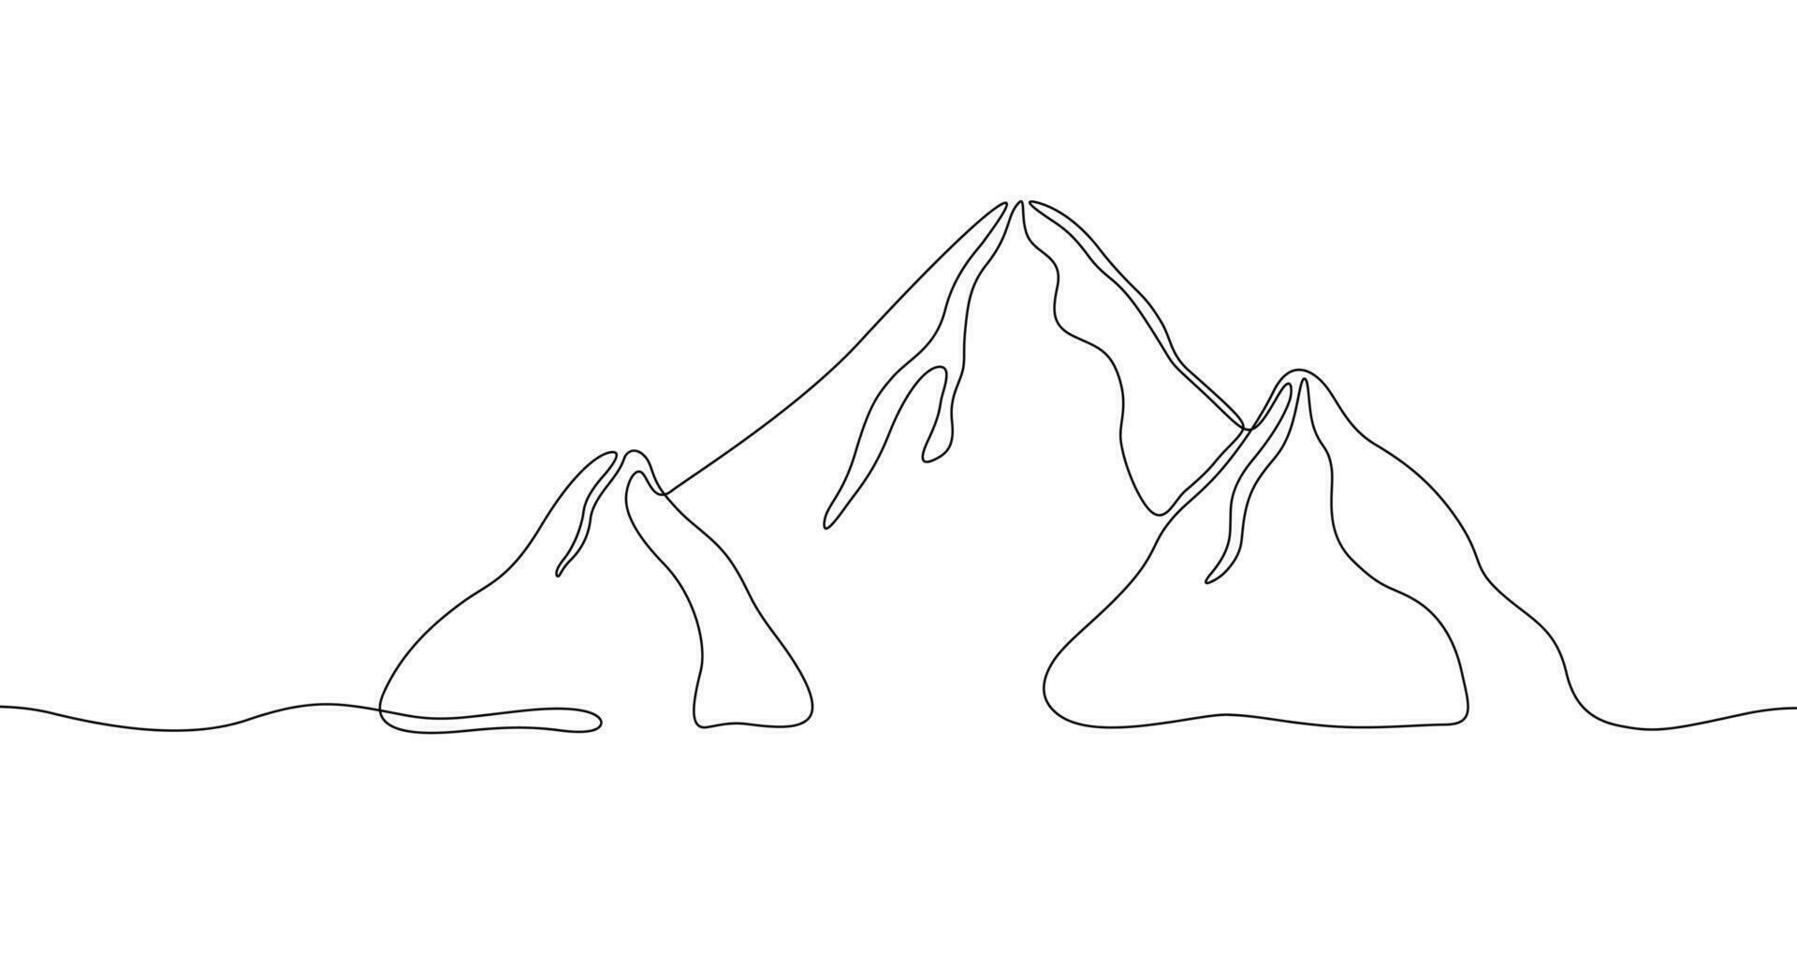 Mountains continuous one line drawing isolated on white background. Hills silhouette in abstract linear style. vector